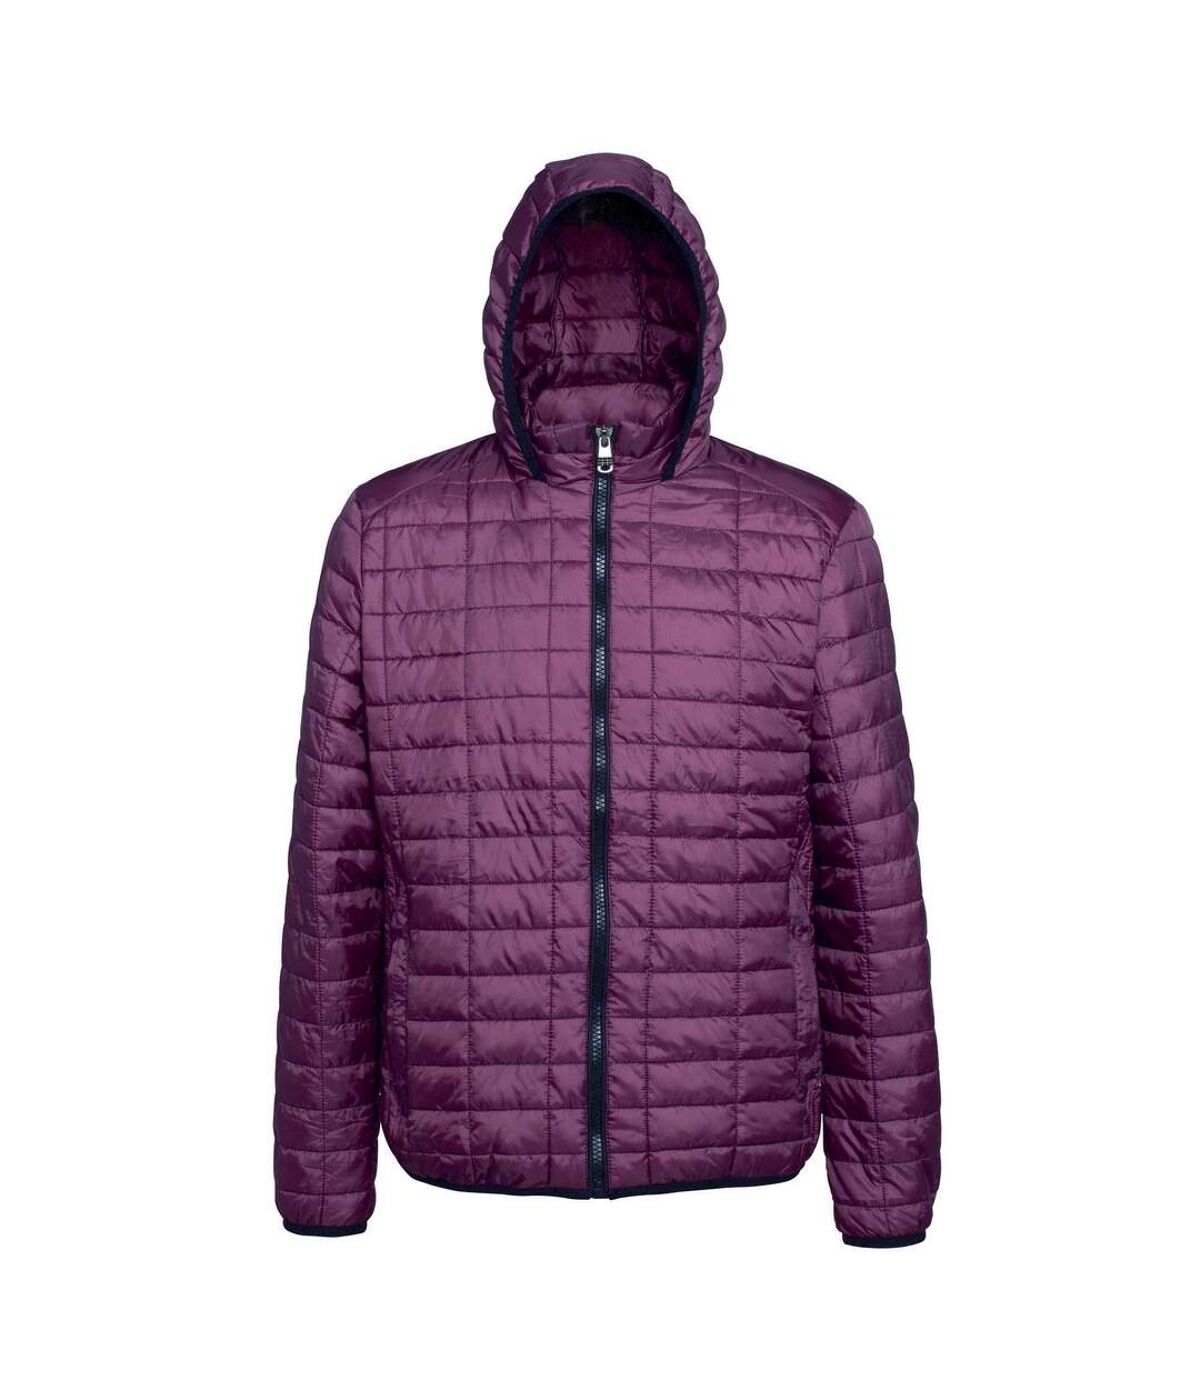 2786 Mens Honeycomb Padded Hooded Jacket (Mulberry)